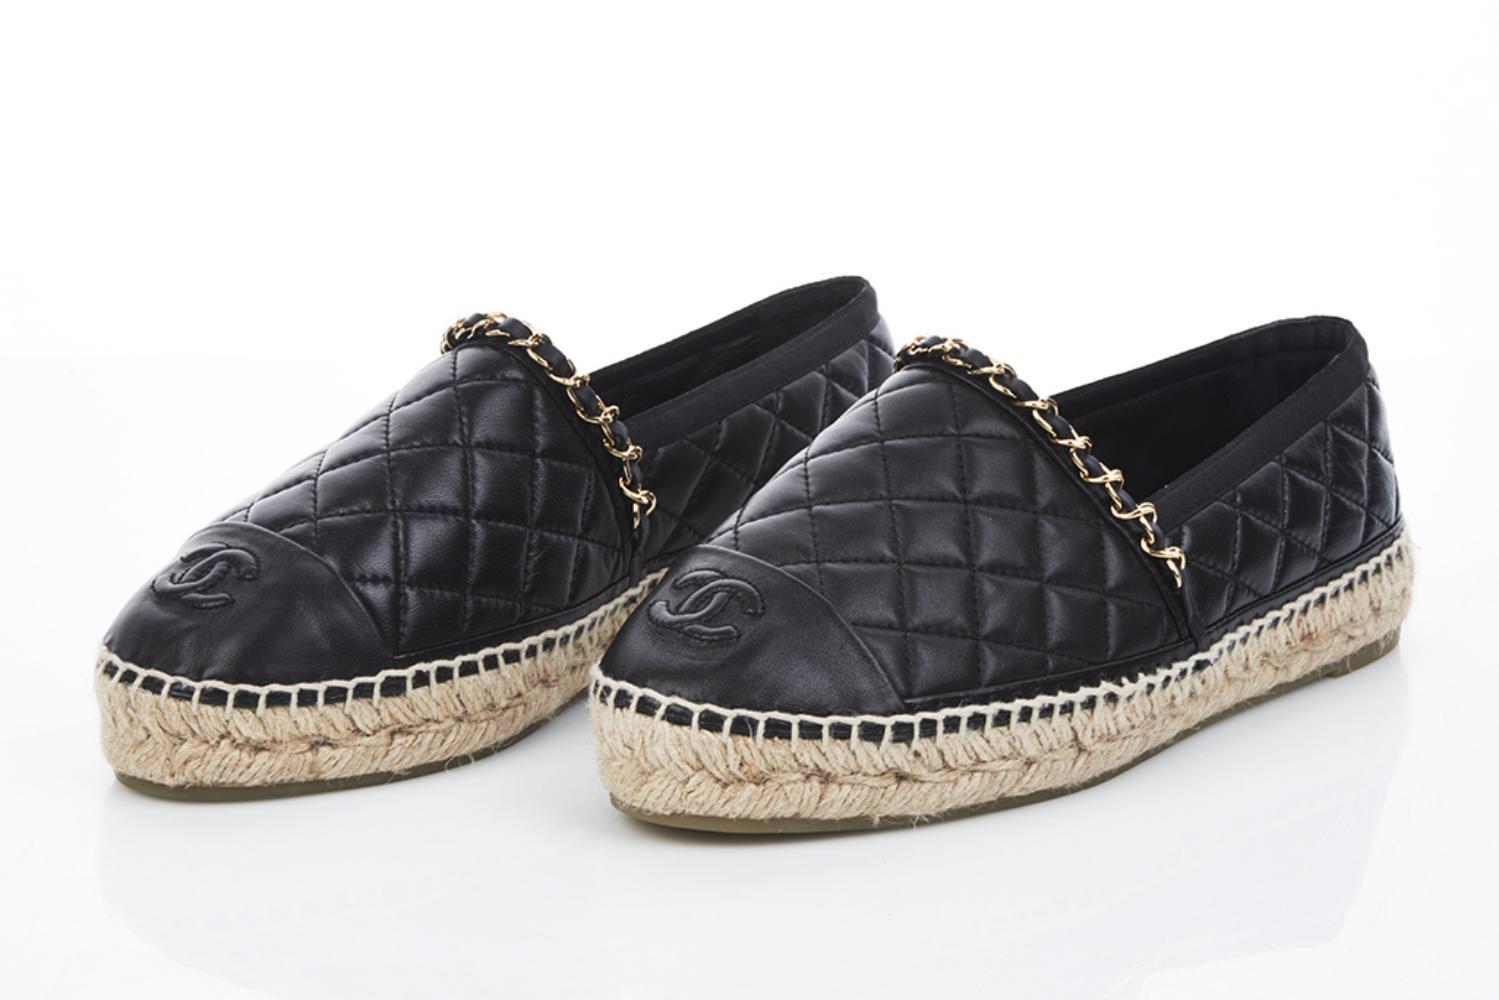 Chanel Espadrilles: Here's Everything You Need to Know